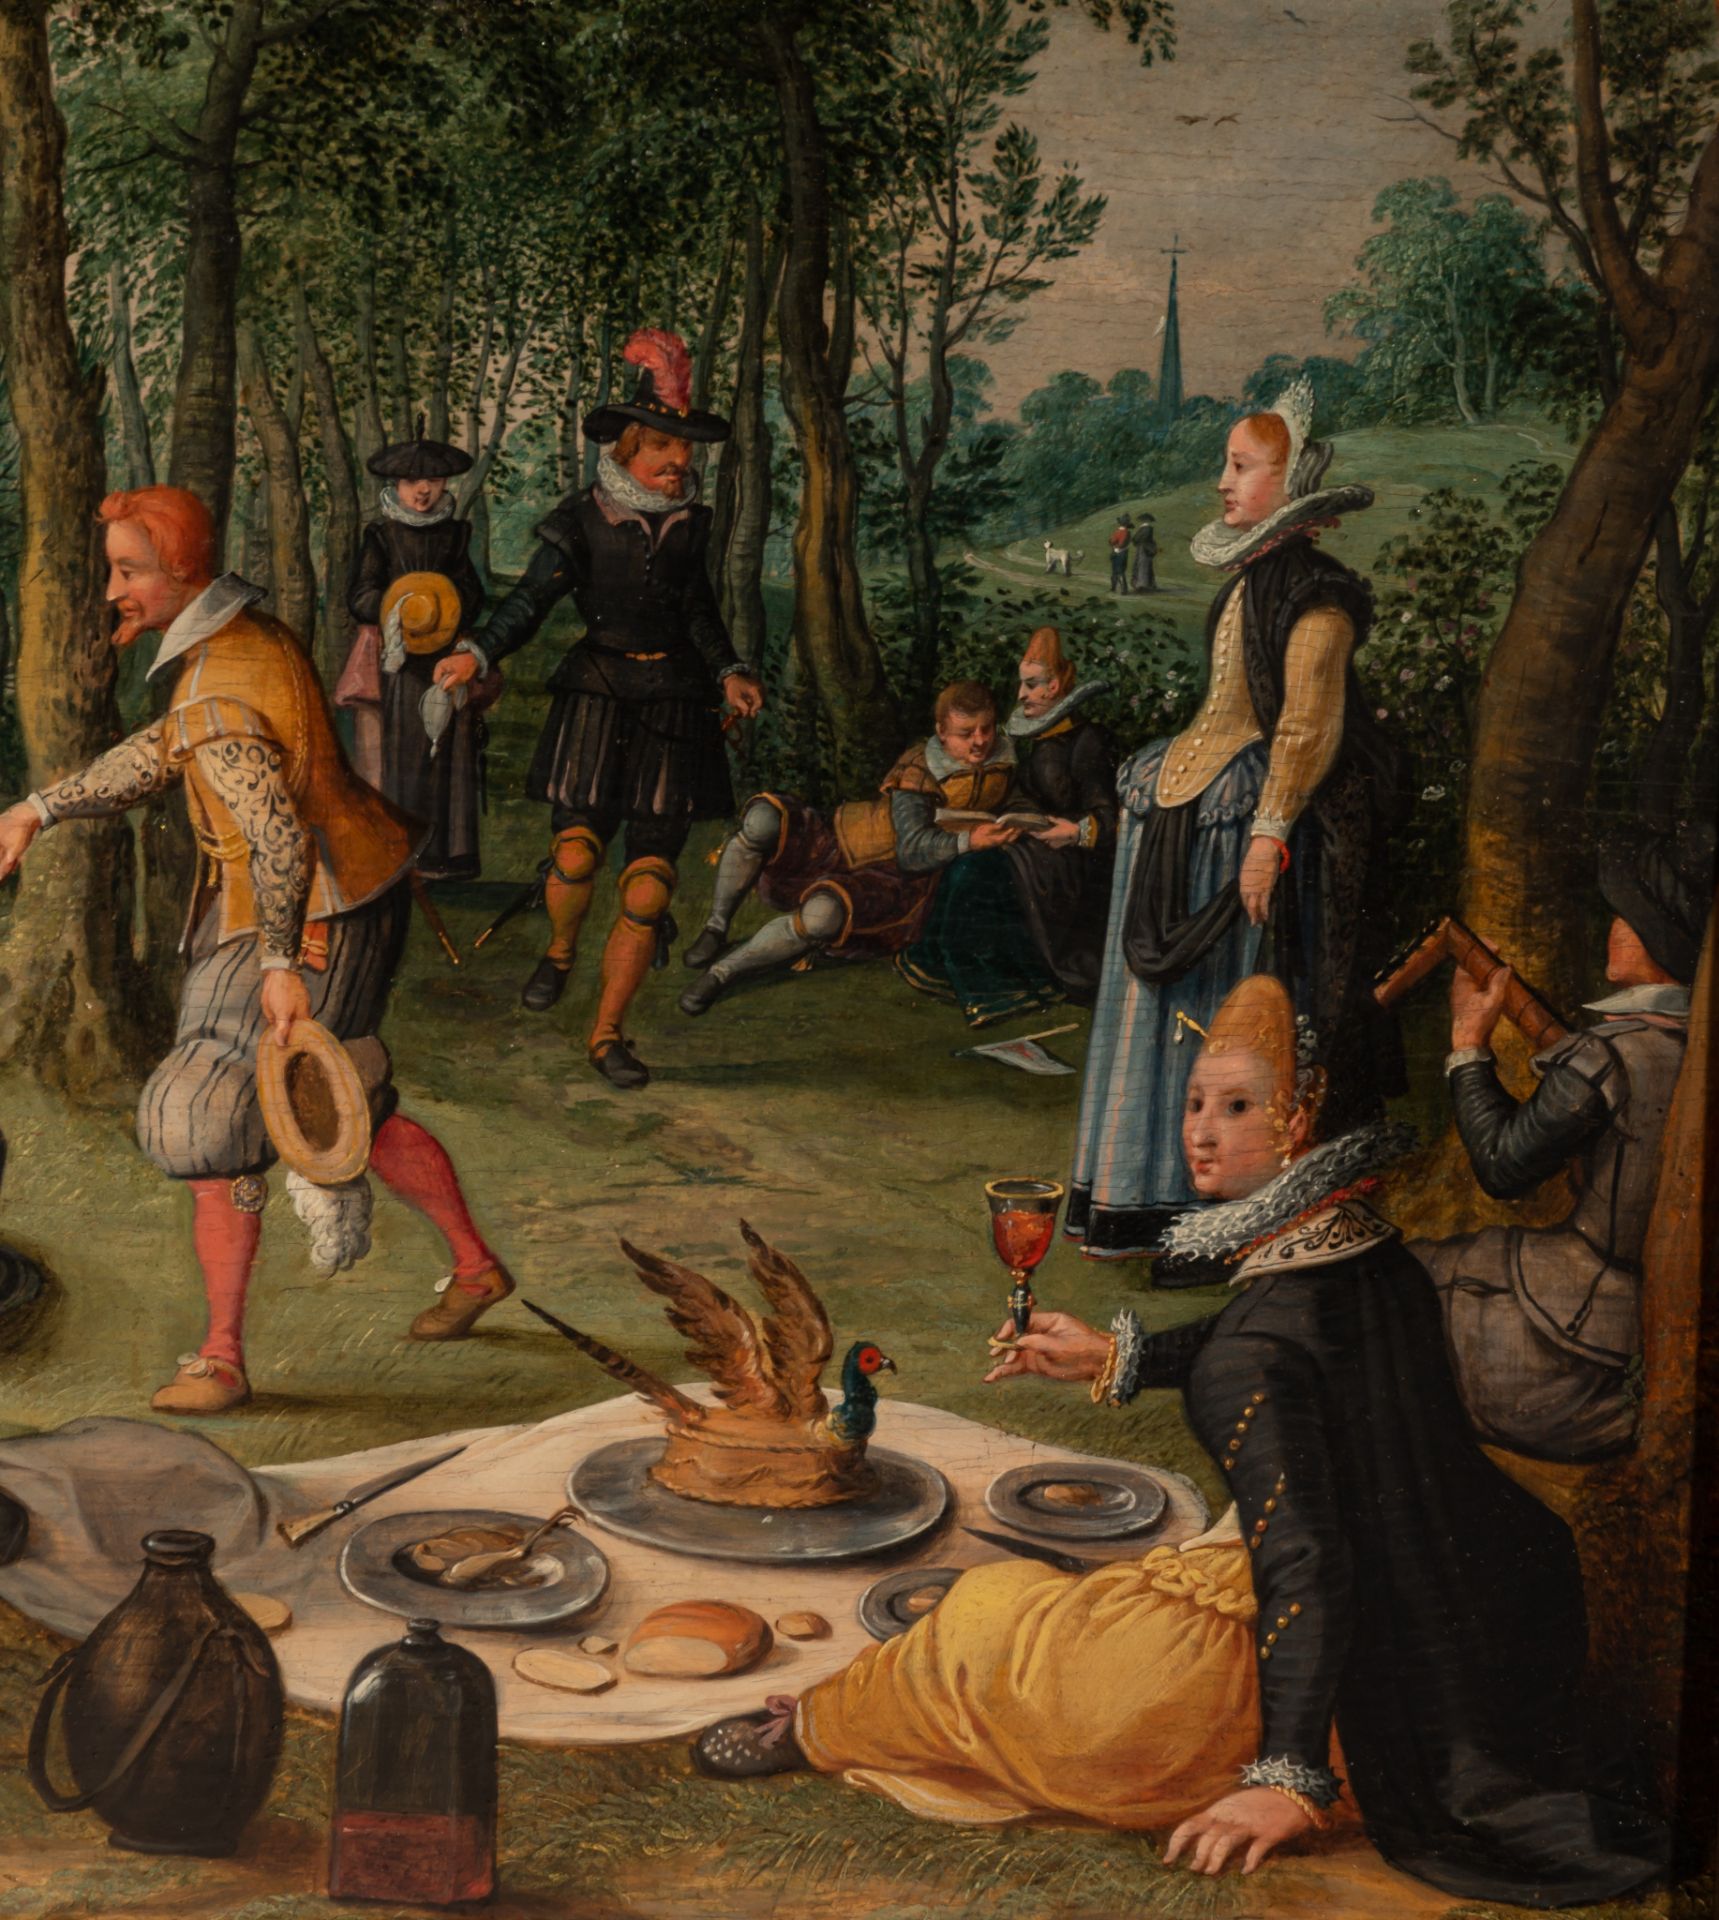 Sebastiaan Vrancx (studio of), Courtly company at the picnic in the park, 17thC, oil on wood, 26 x 3 - Image 6 of 6